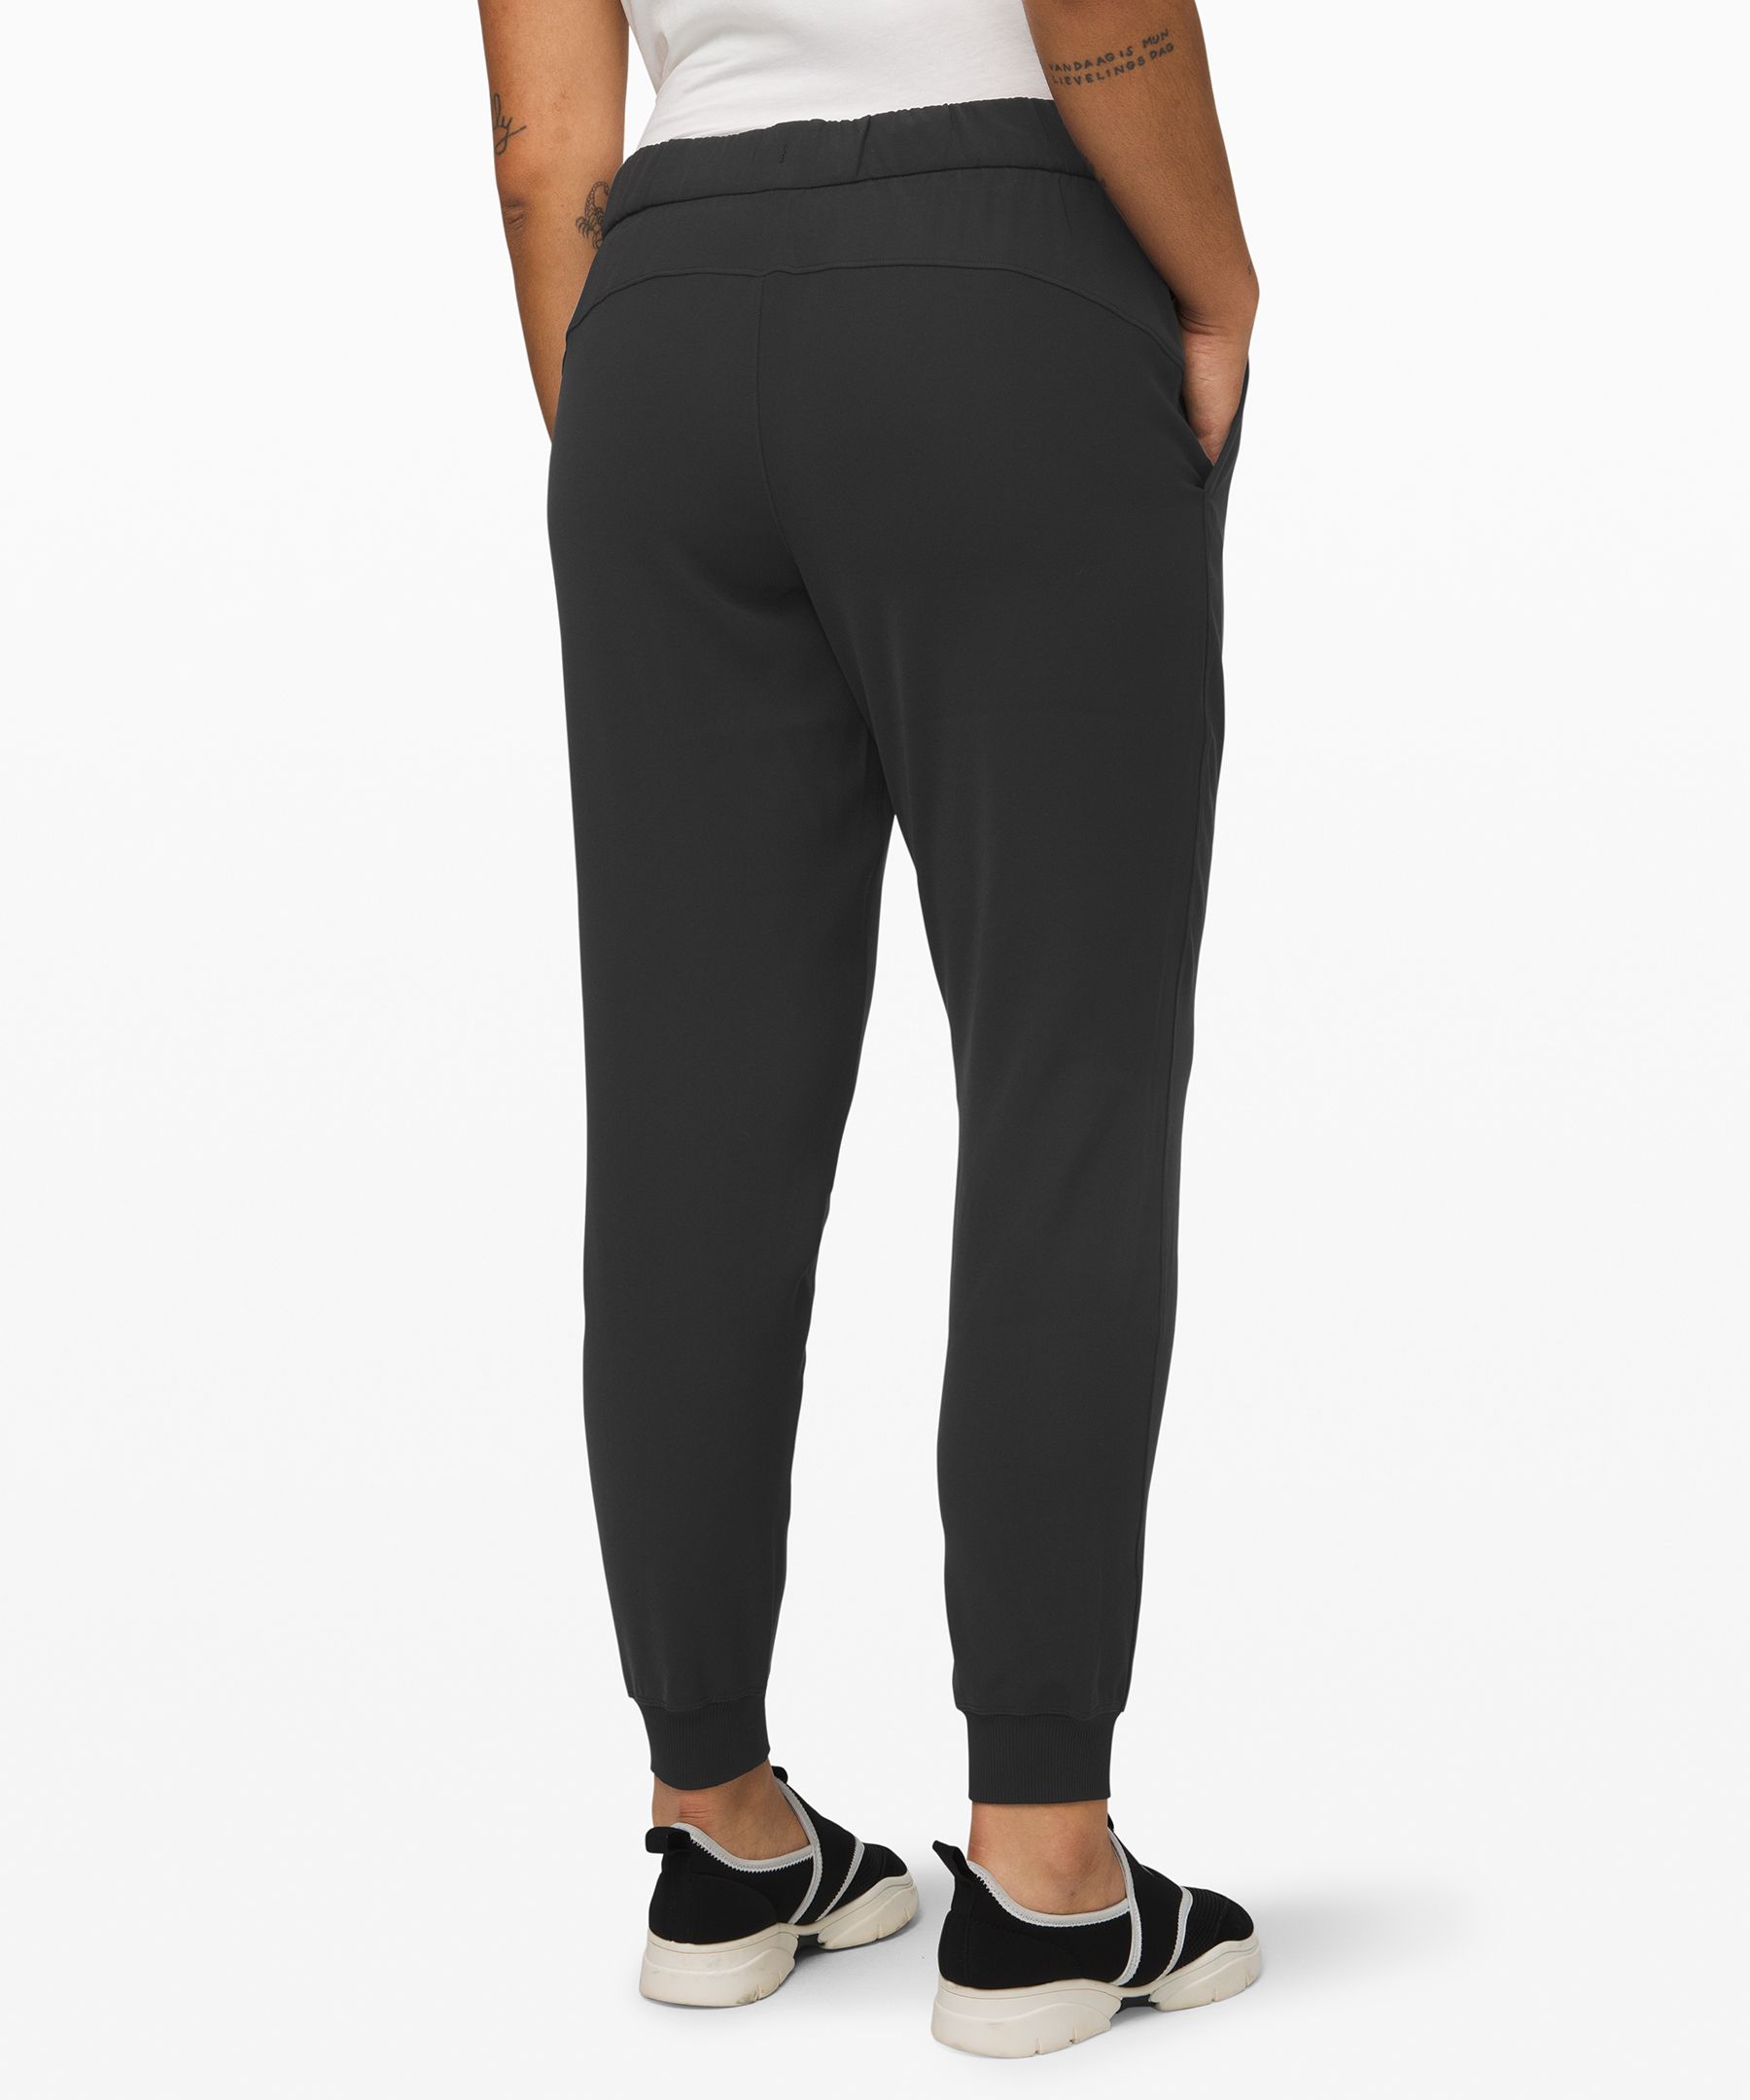 Guess Track Pants & Joggers for Women - Poshmark